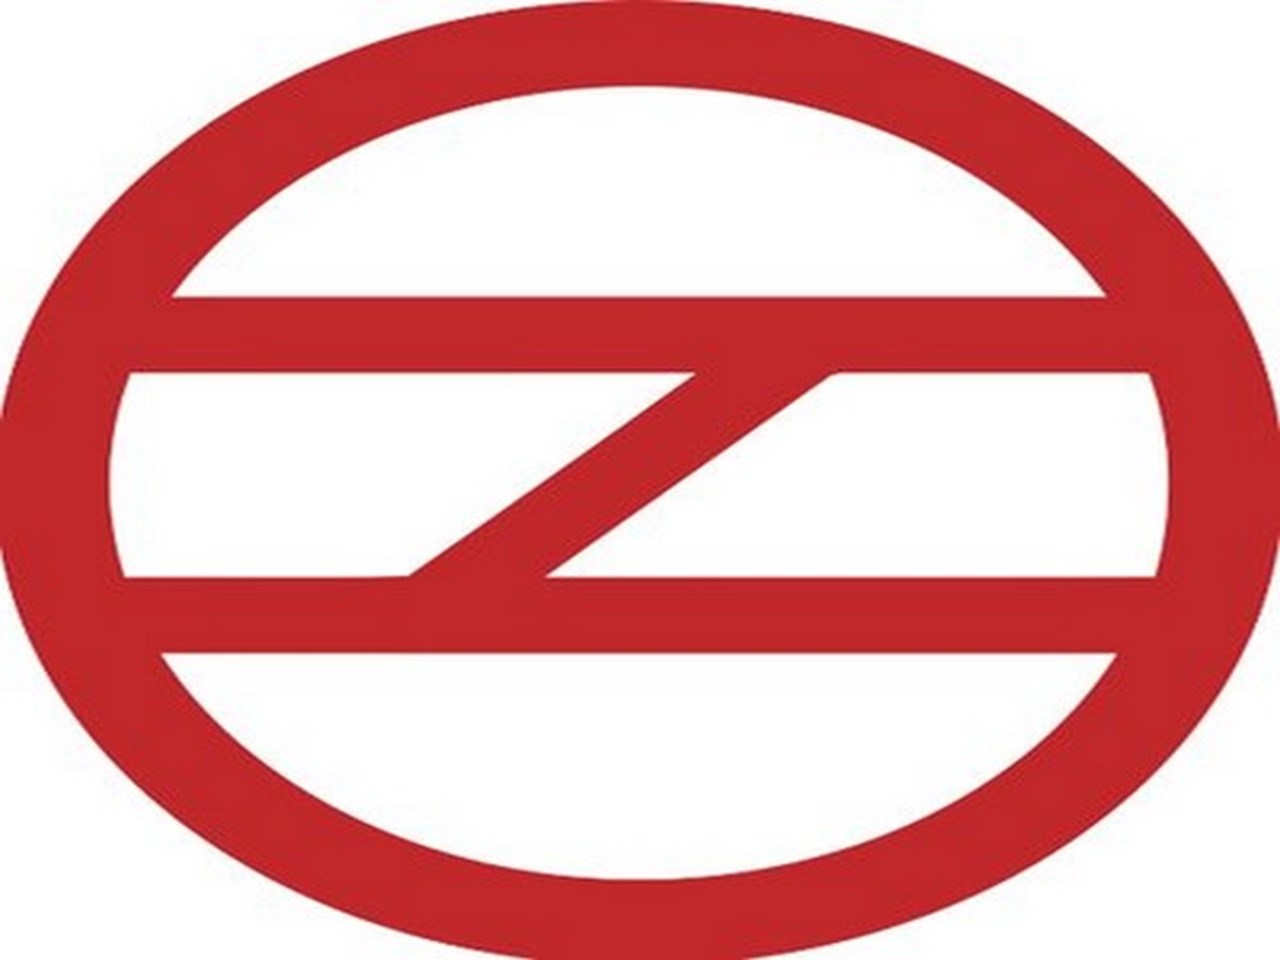 Over 74 lakh QR code-based paper tickets sold, dip in sale of tokens: DMRC